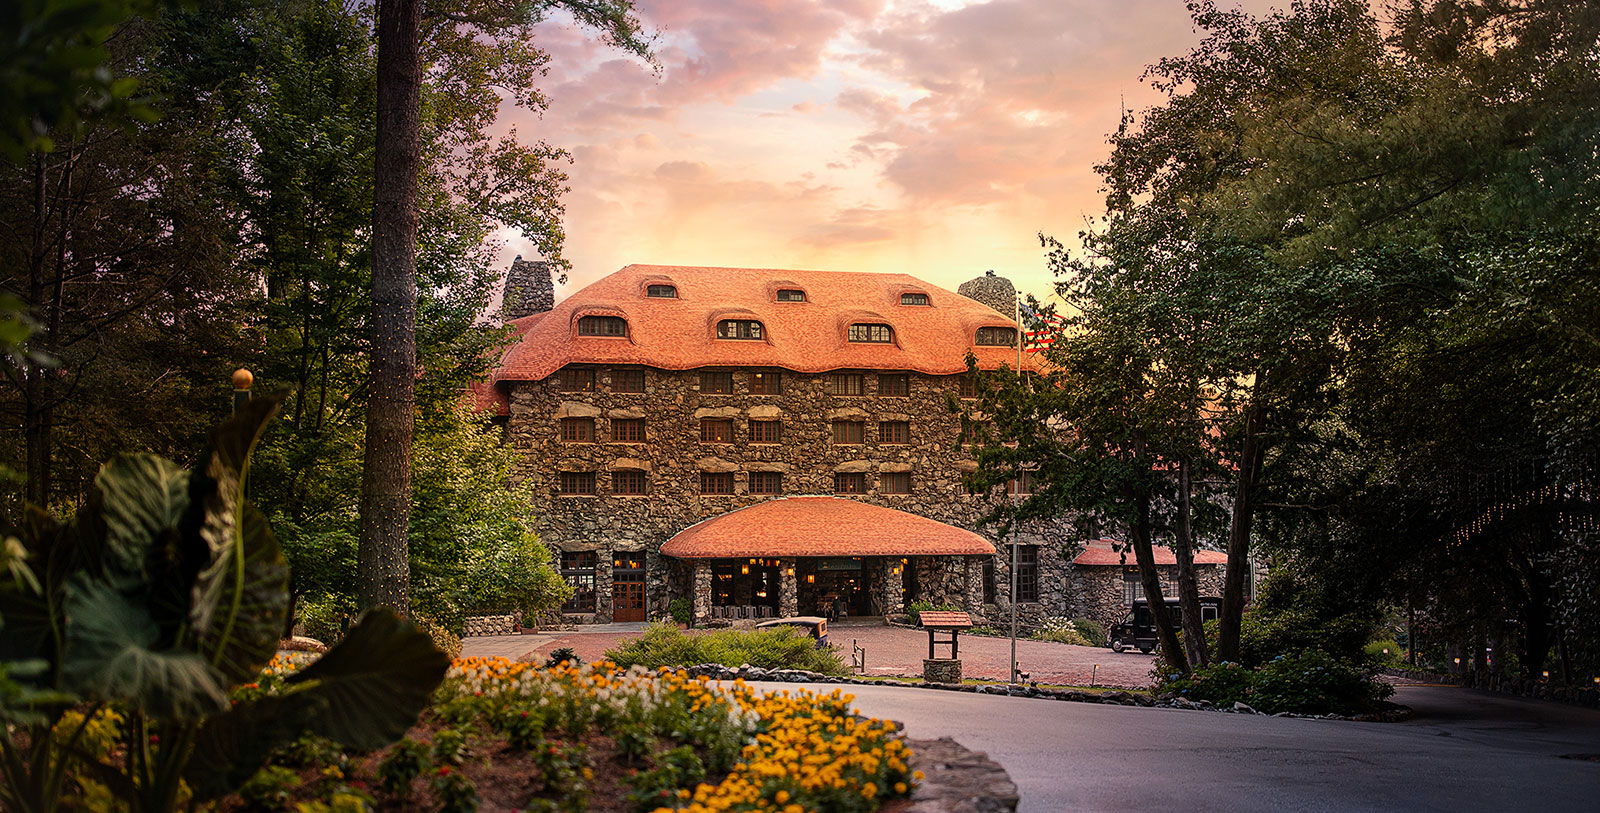 Image of Hotel Exterior The Omni Grove Park Inn, 1913, Member of Historic Hotels of America, in Asheville, North Carolina, Overview